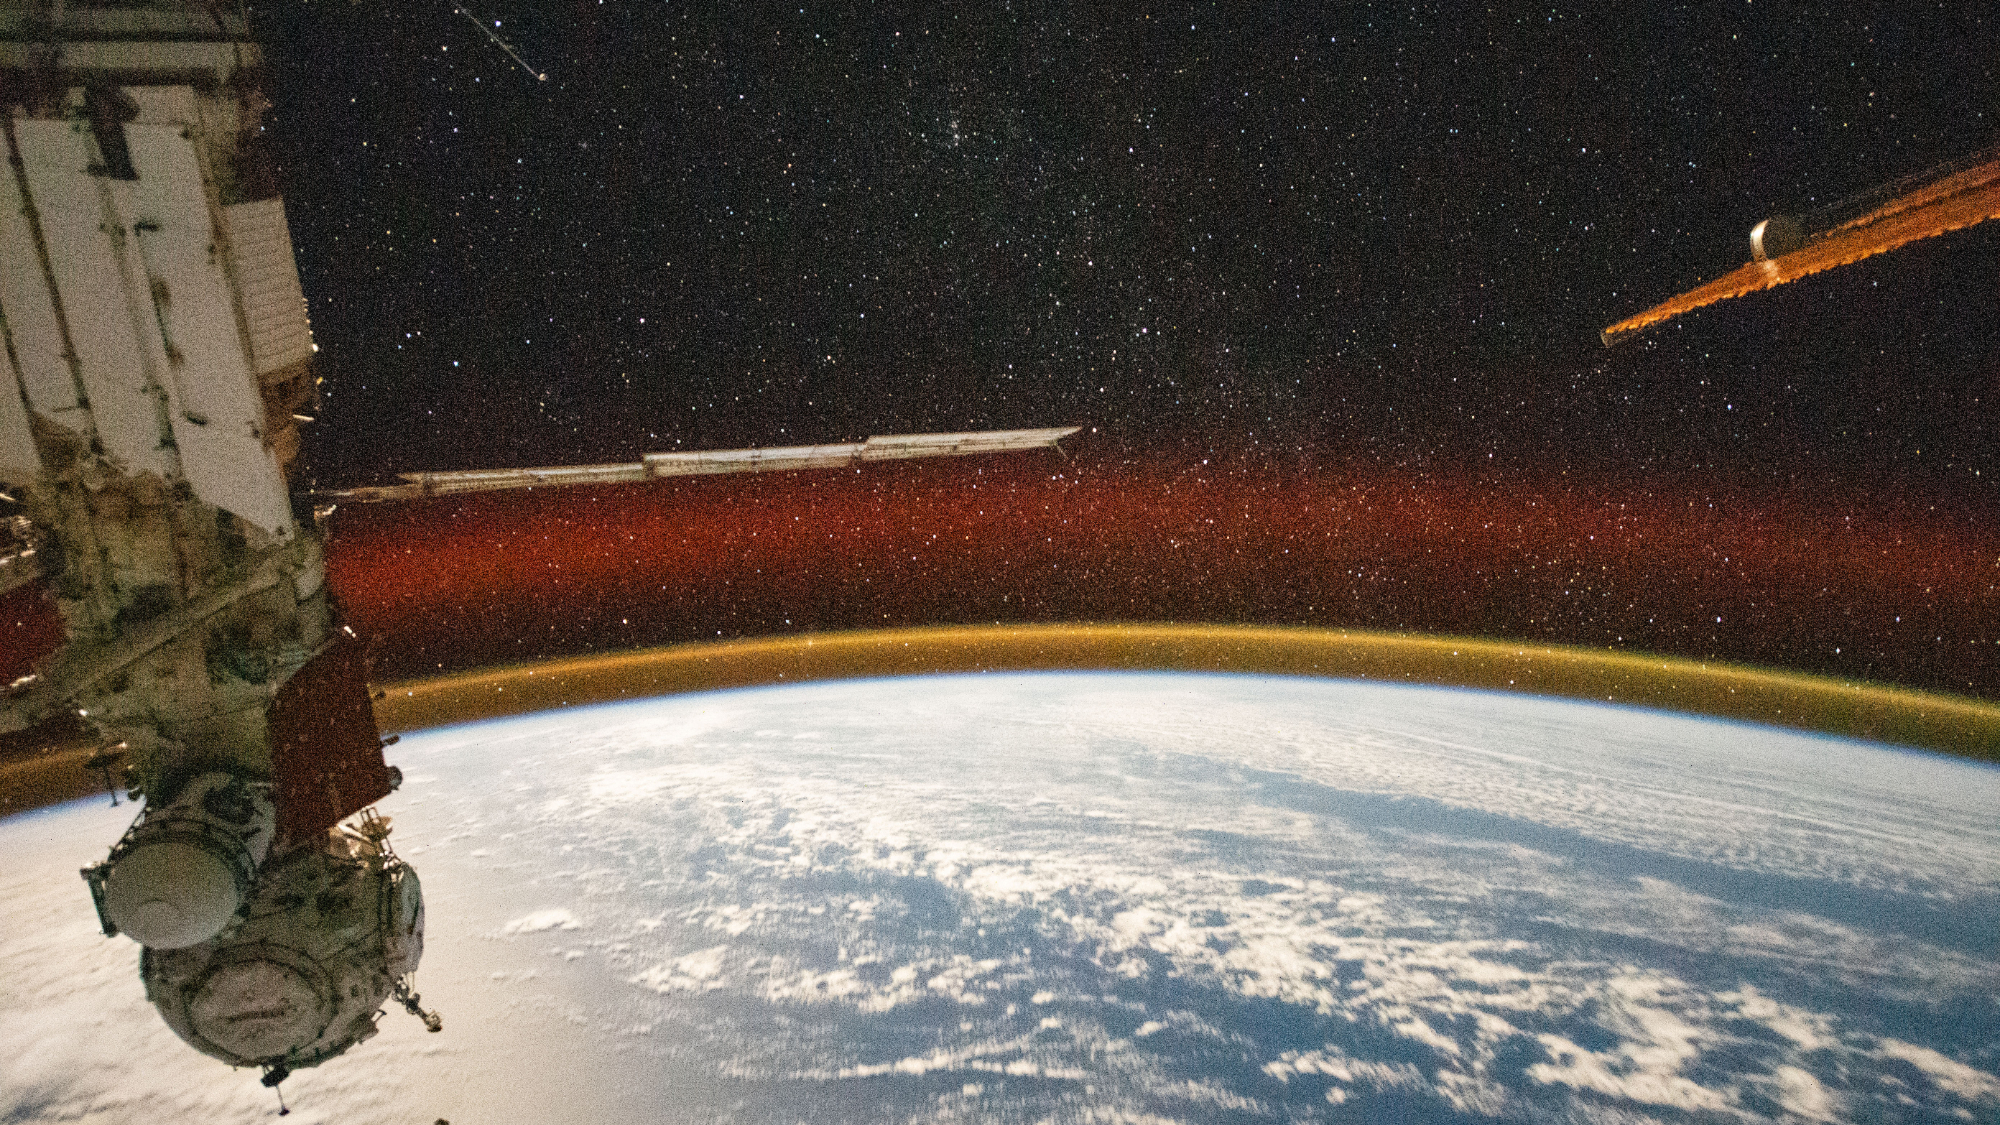 See Earth’s atmosphere glow gold in gorgeous photo taken from the ISS Space